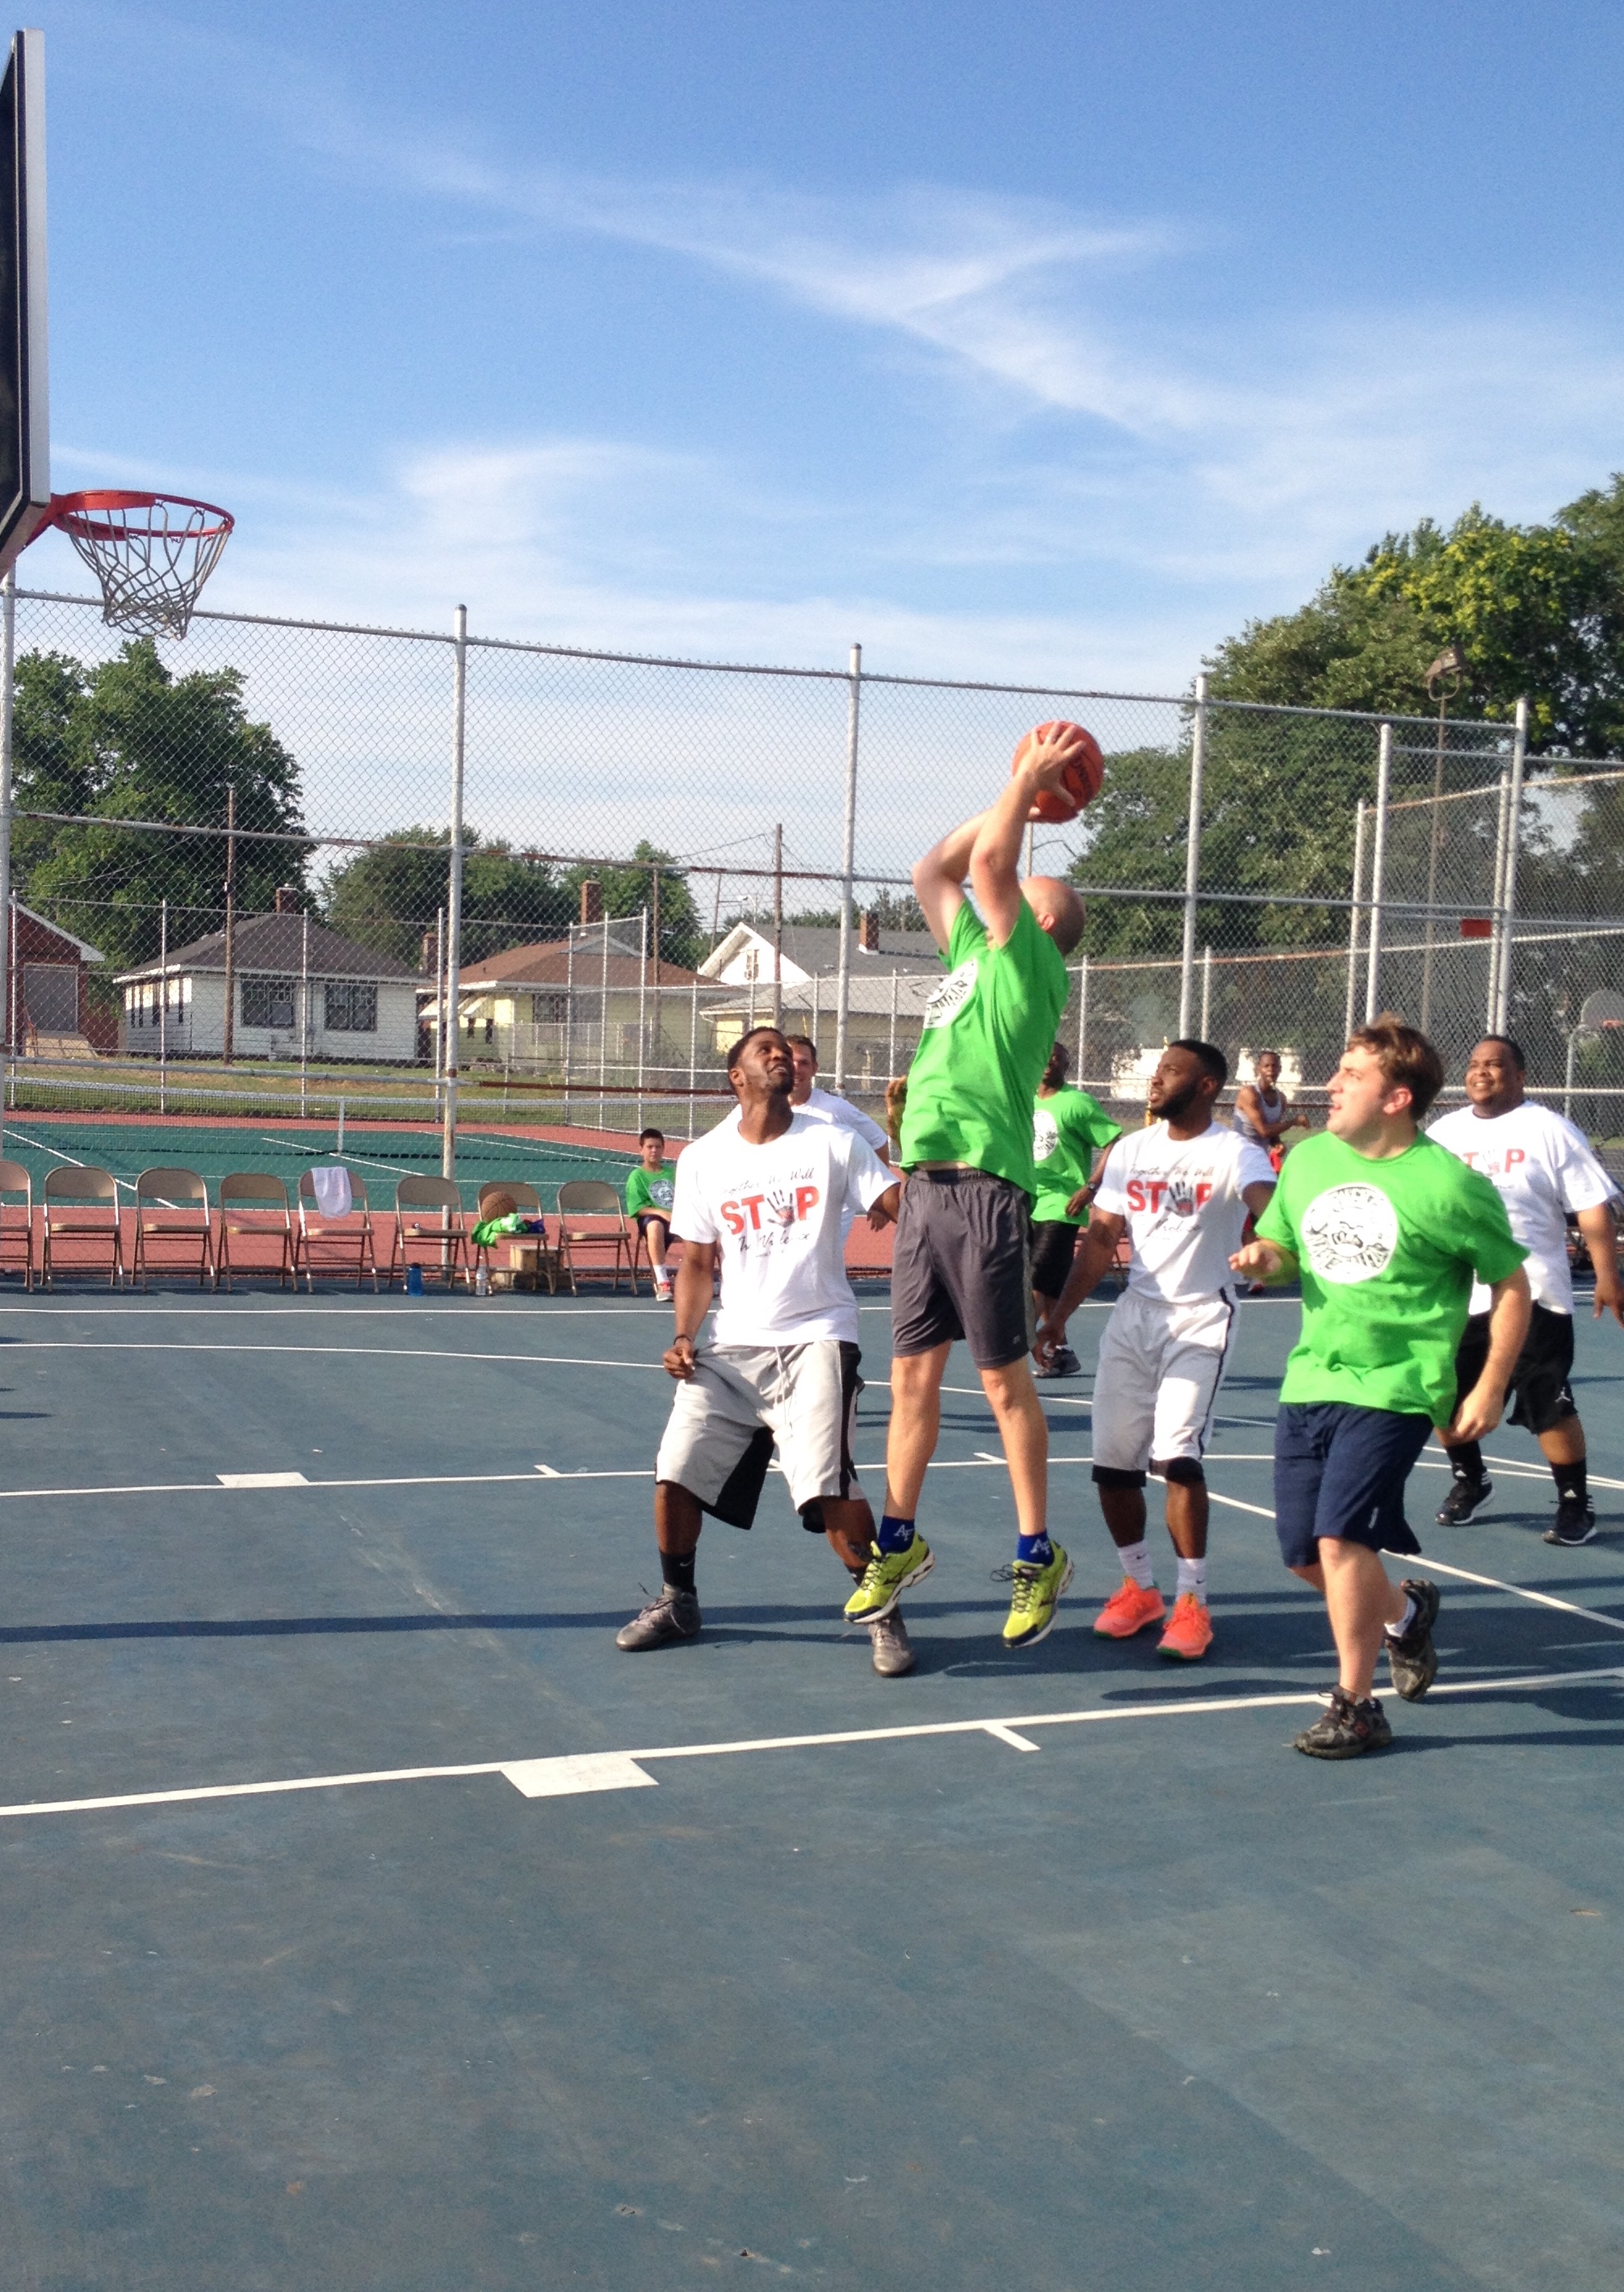 Photos are Evansville Officers and Prosecutor joining the community “dust bowl” Basket Ball 